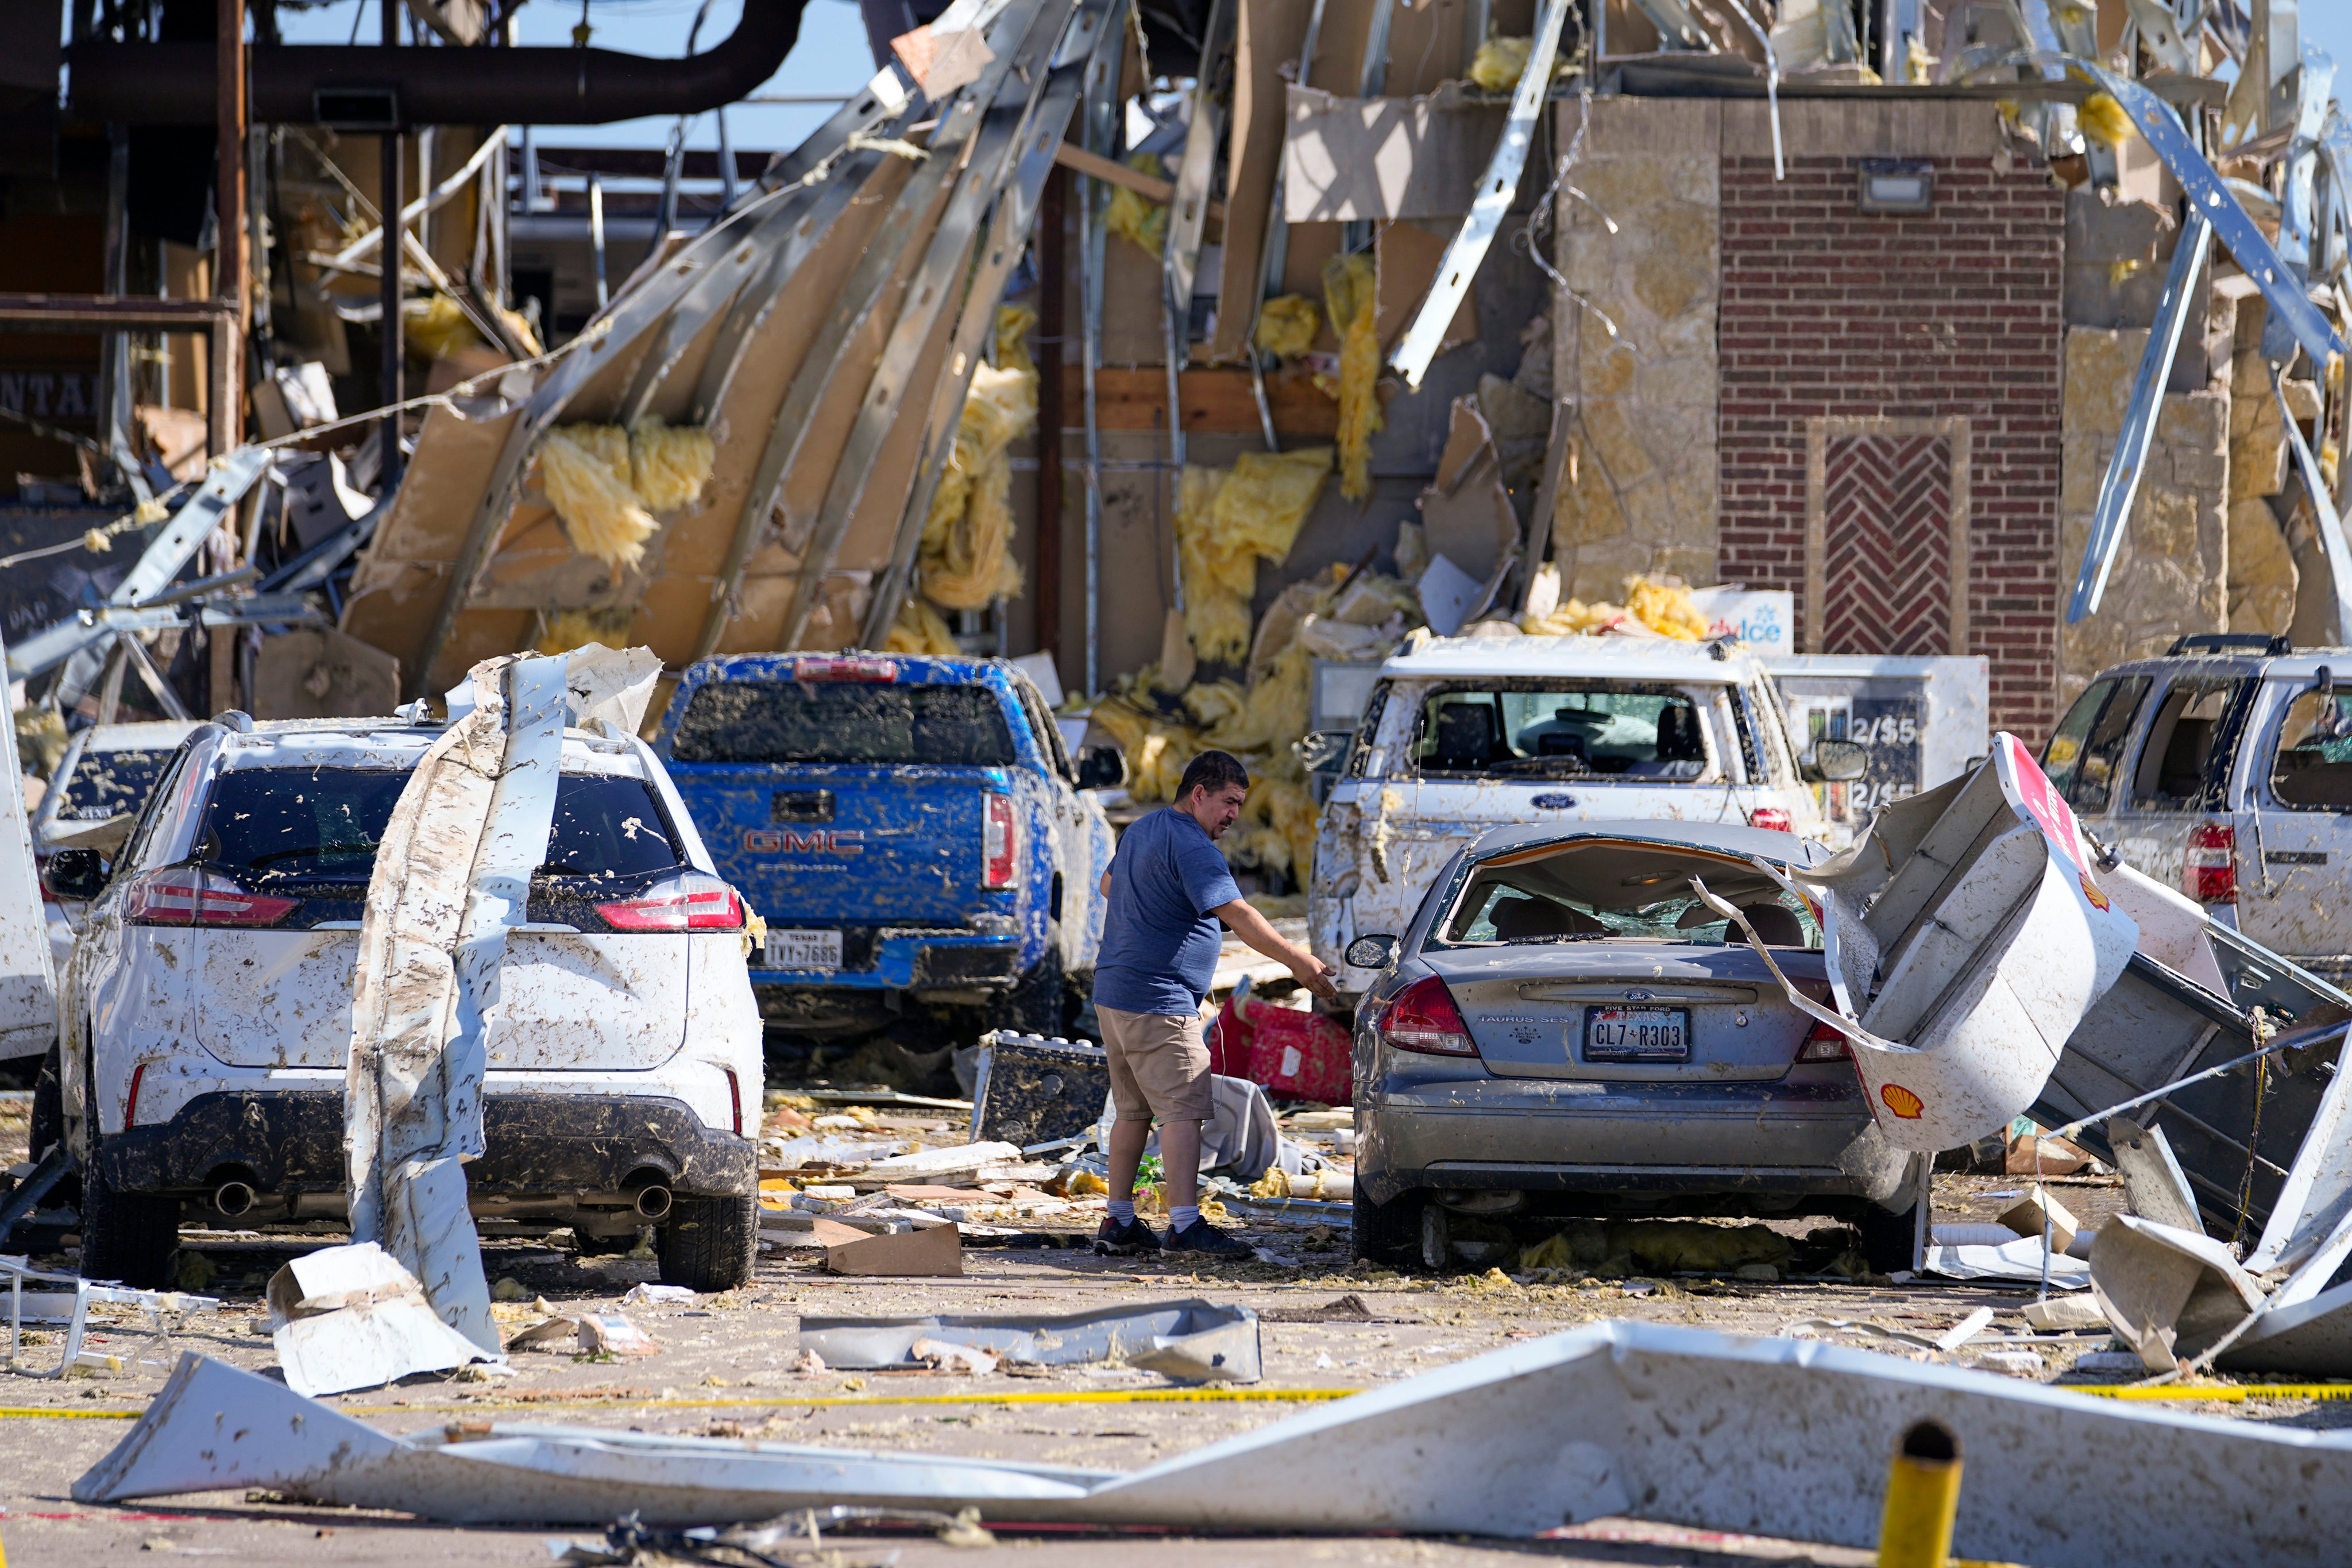 A man looks at a damaged car after a tornado hit in Valley View, Texas. Photo: AP